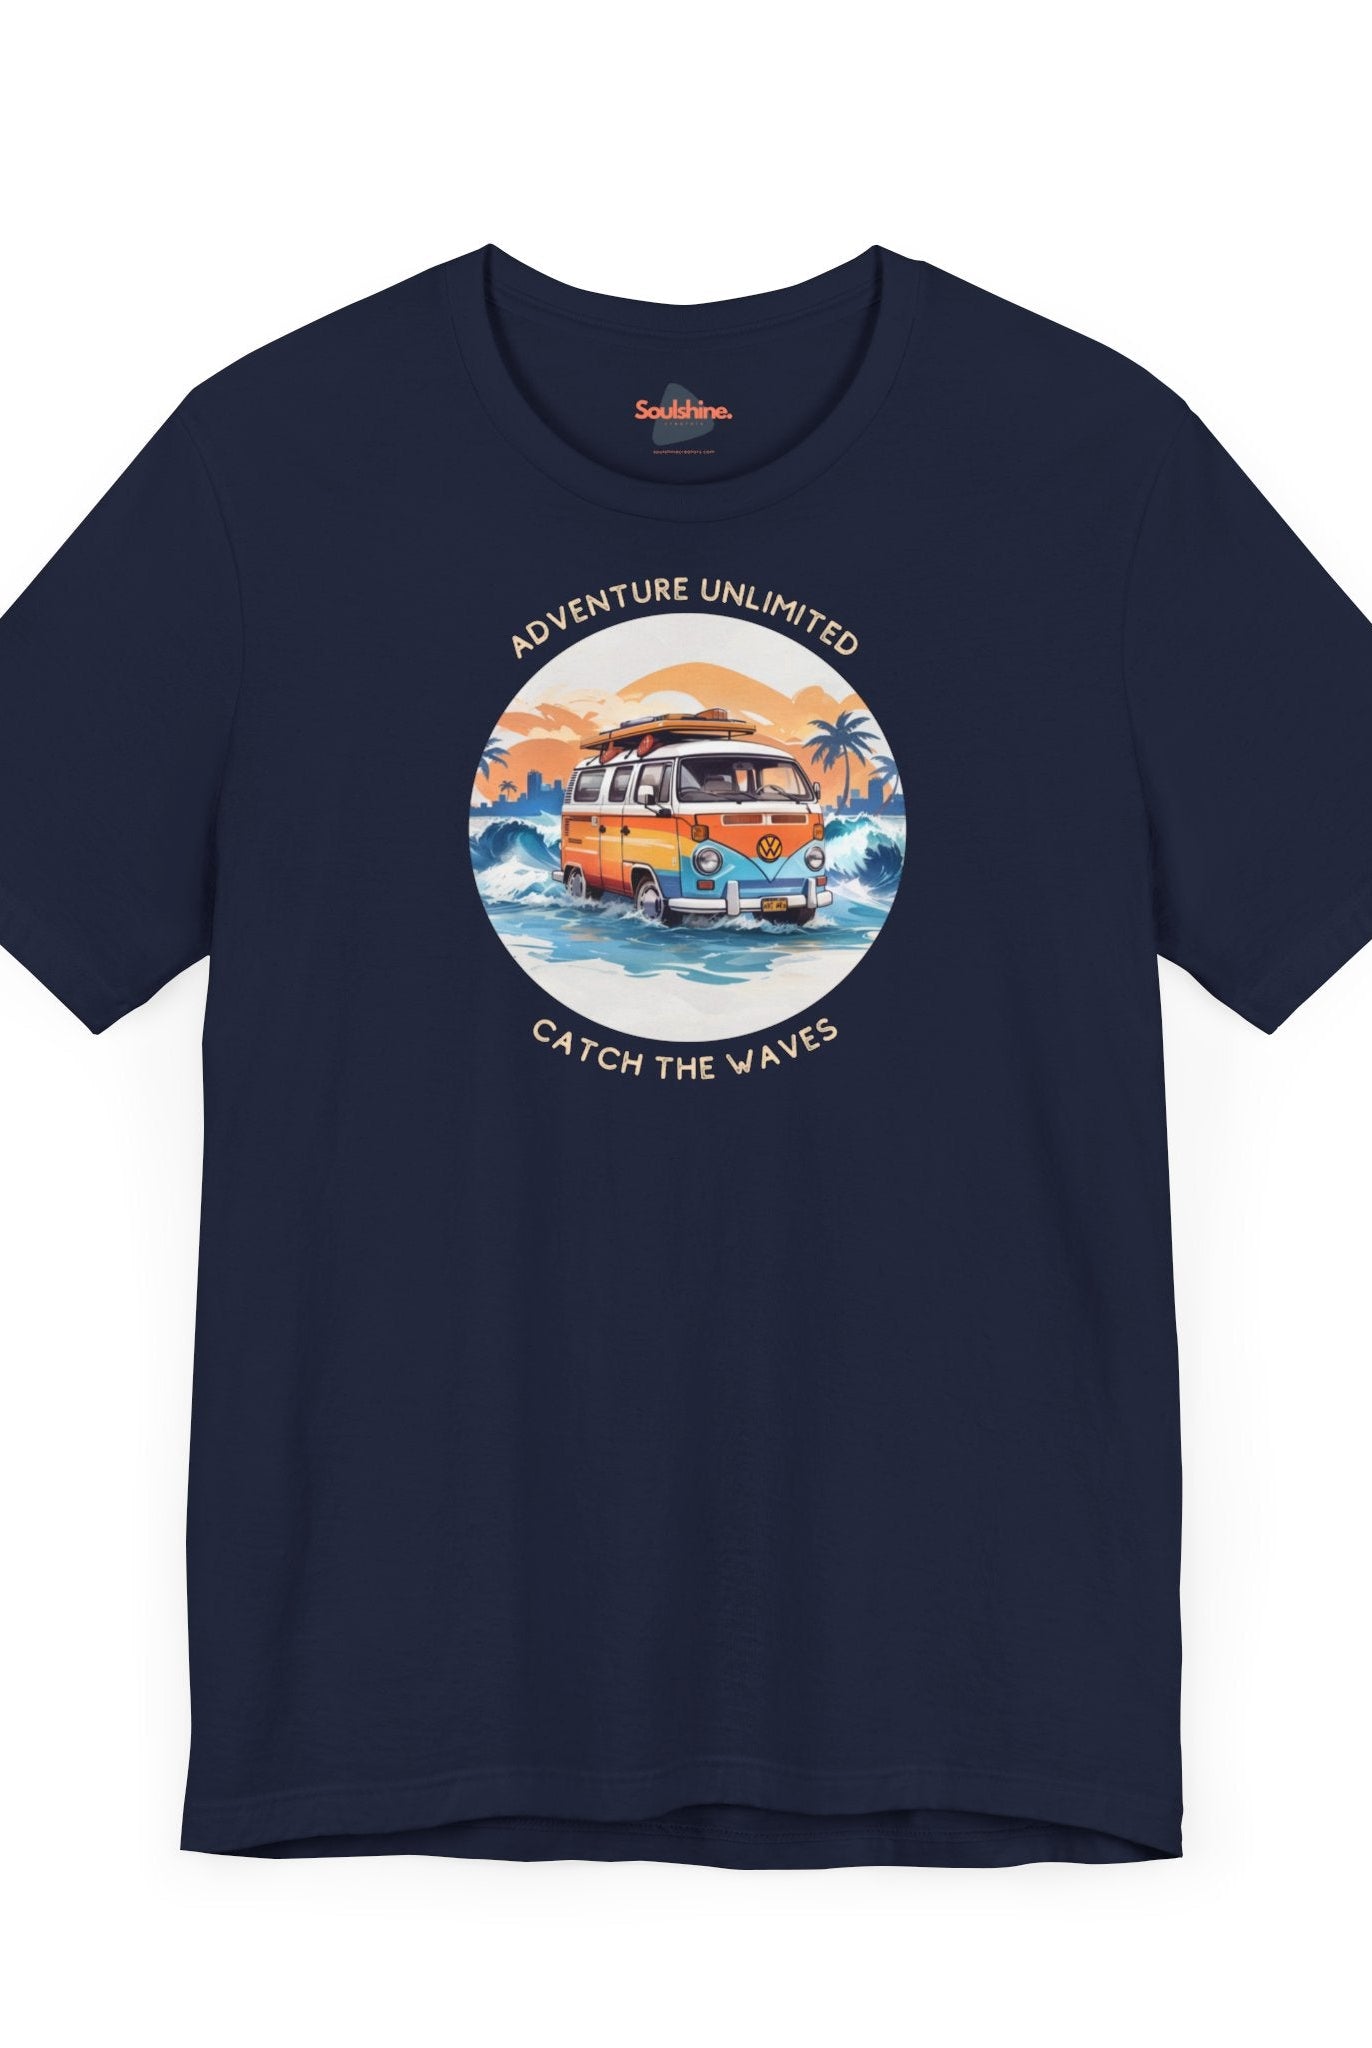 Adventure Unlimited Surfing T-Shirt with Save the Van graphic printed on navy garment